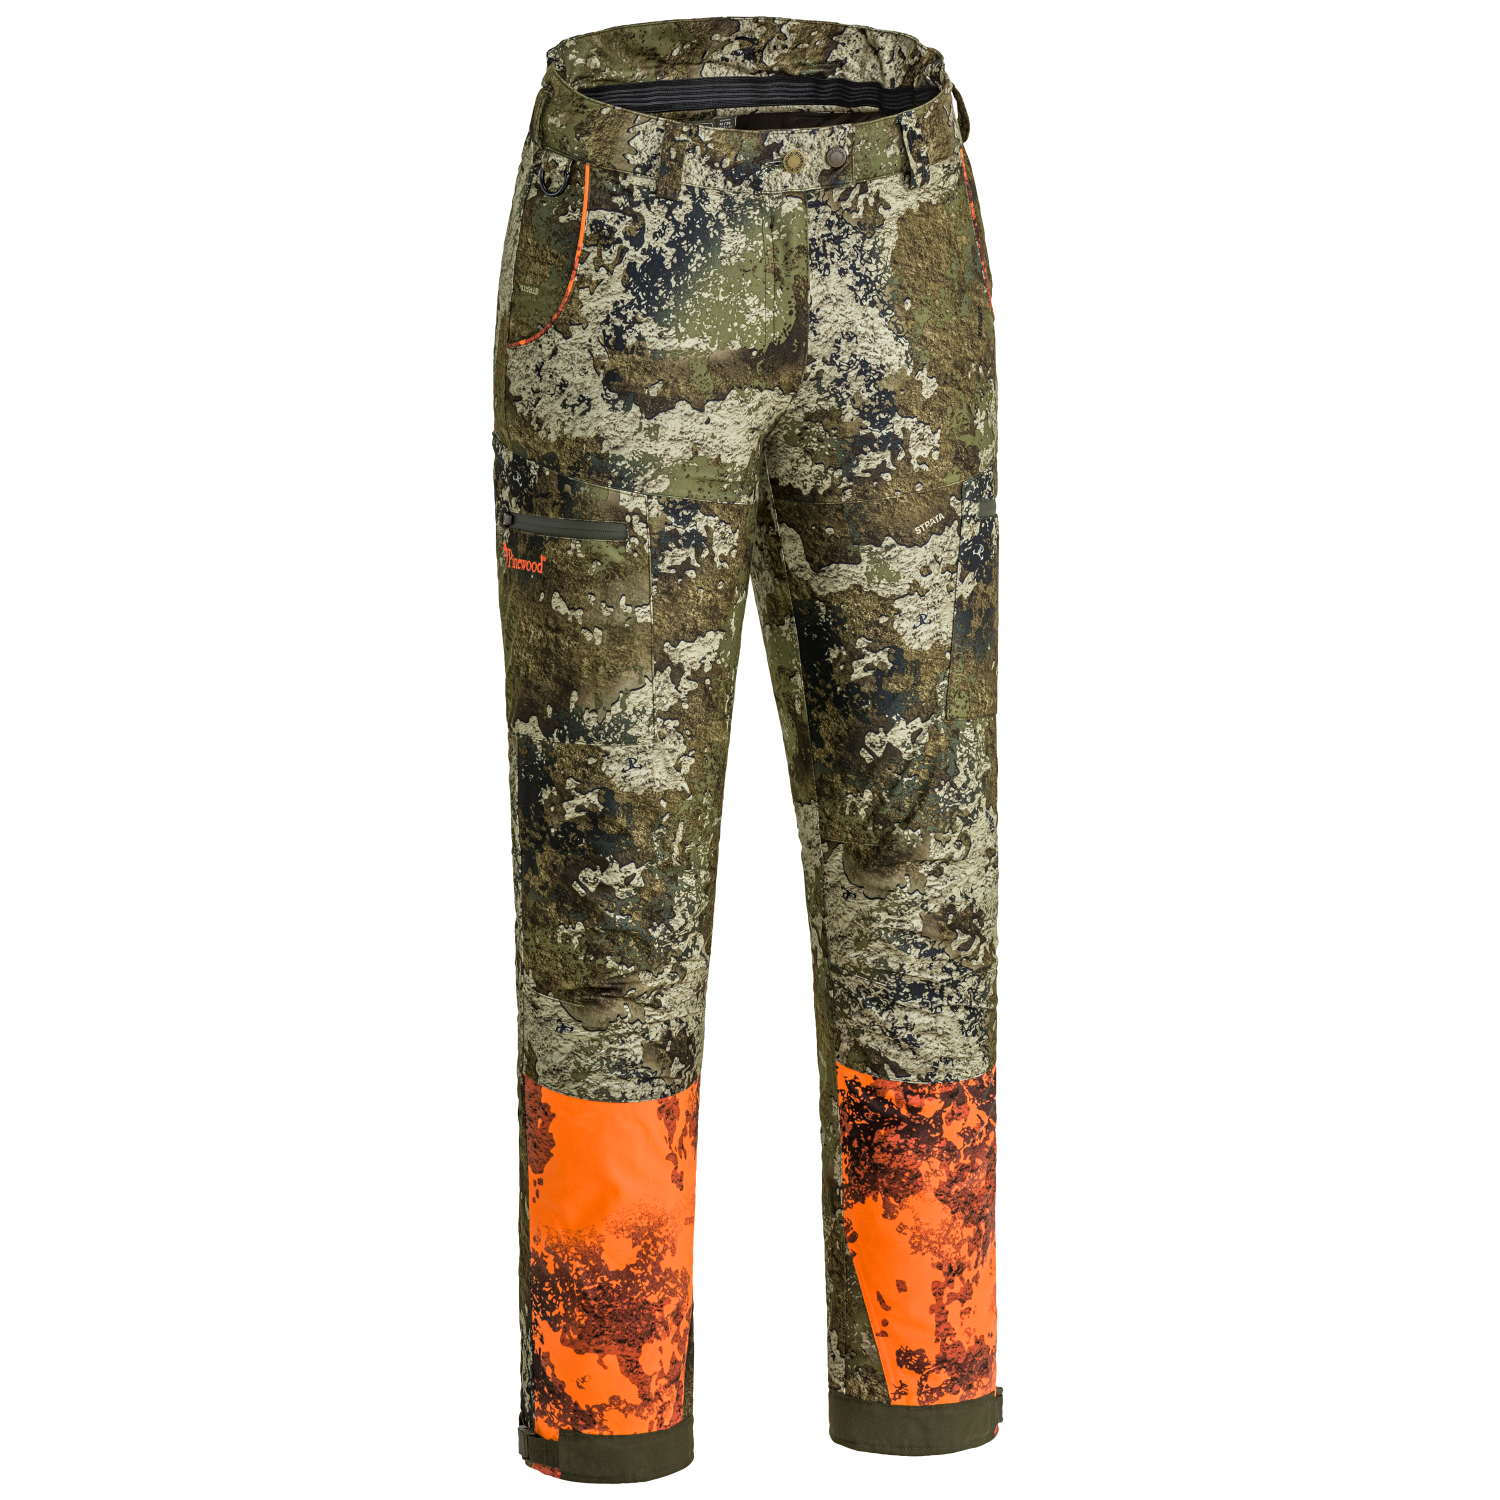 Pinewood Womens Hunting Pants Furudal/Retriever Active Camou at low prices